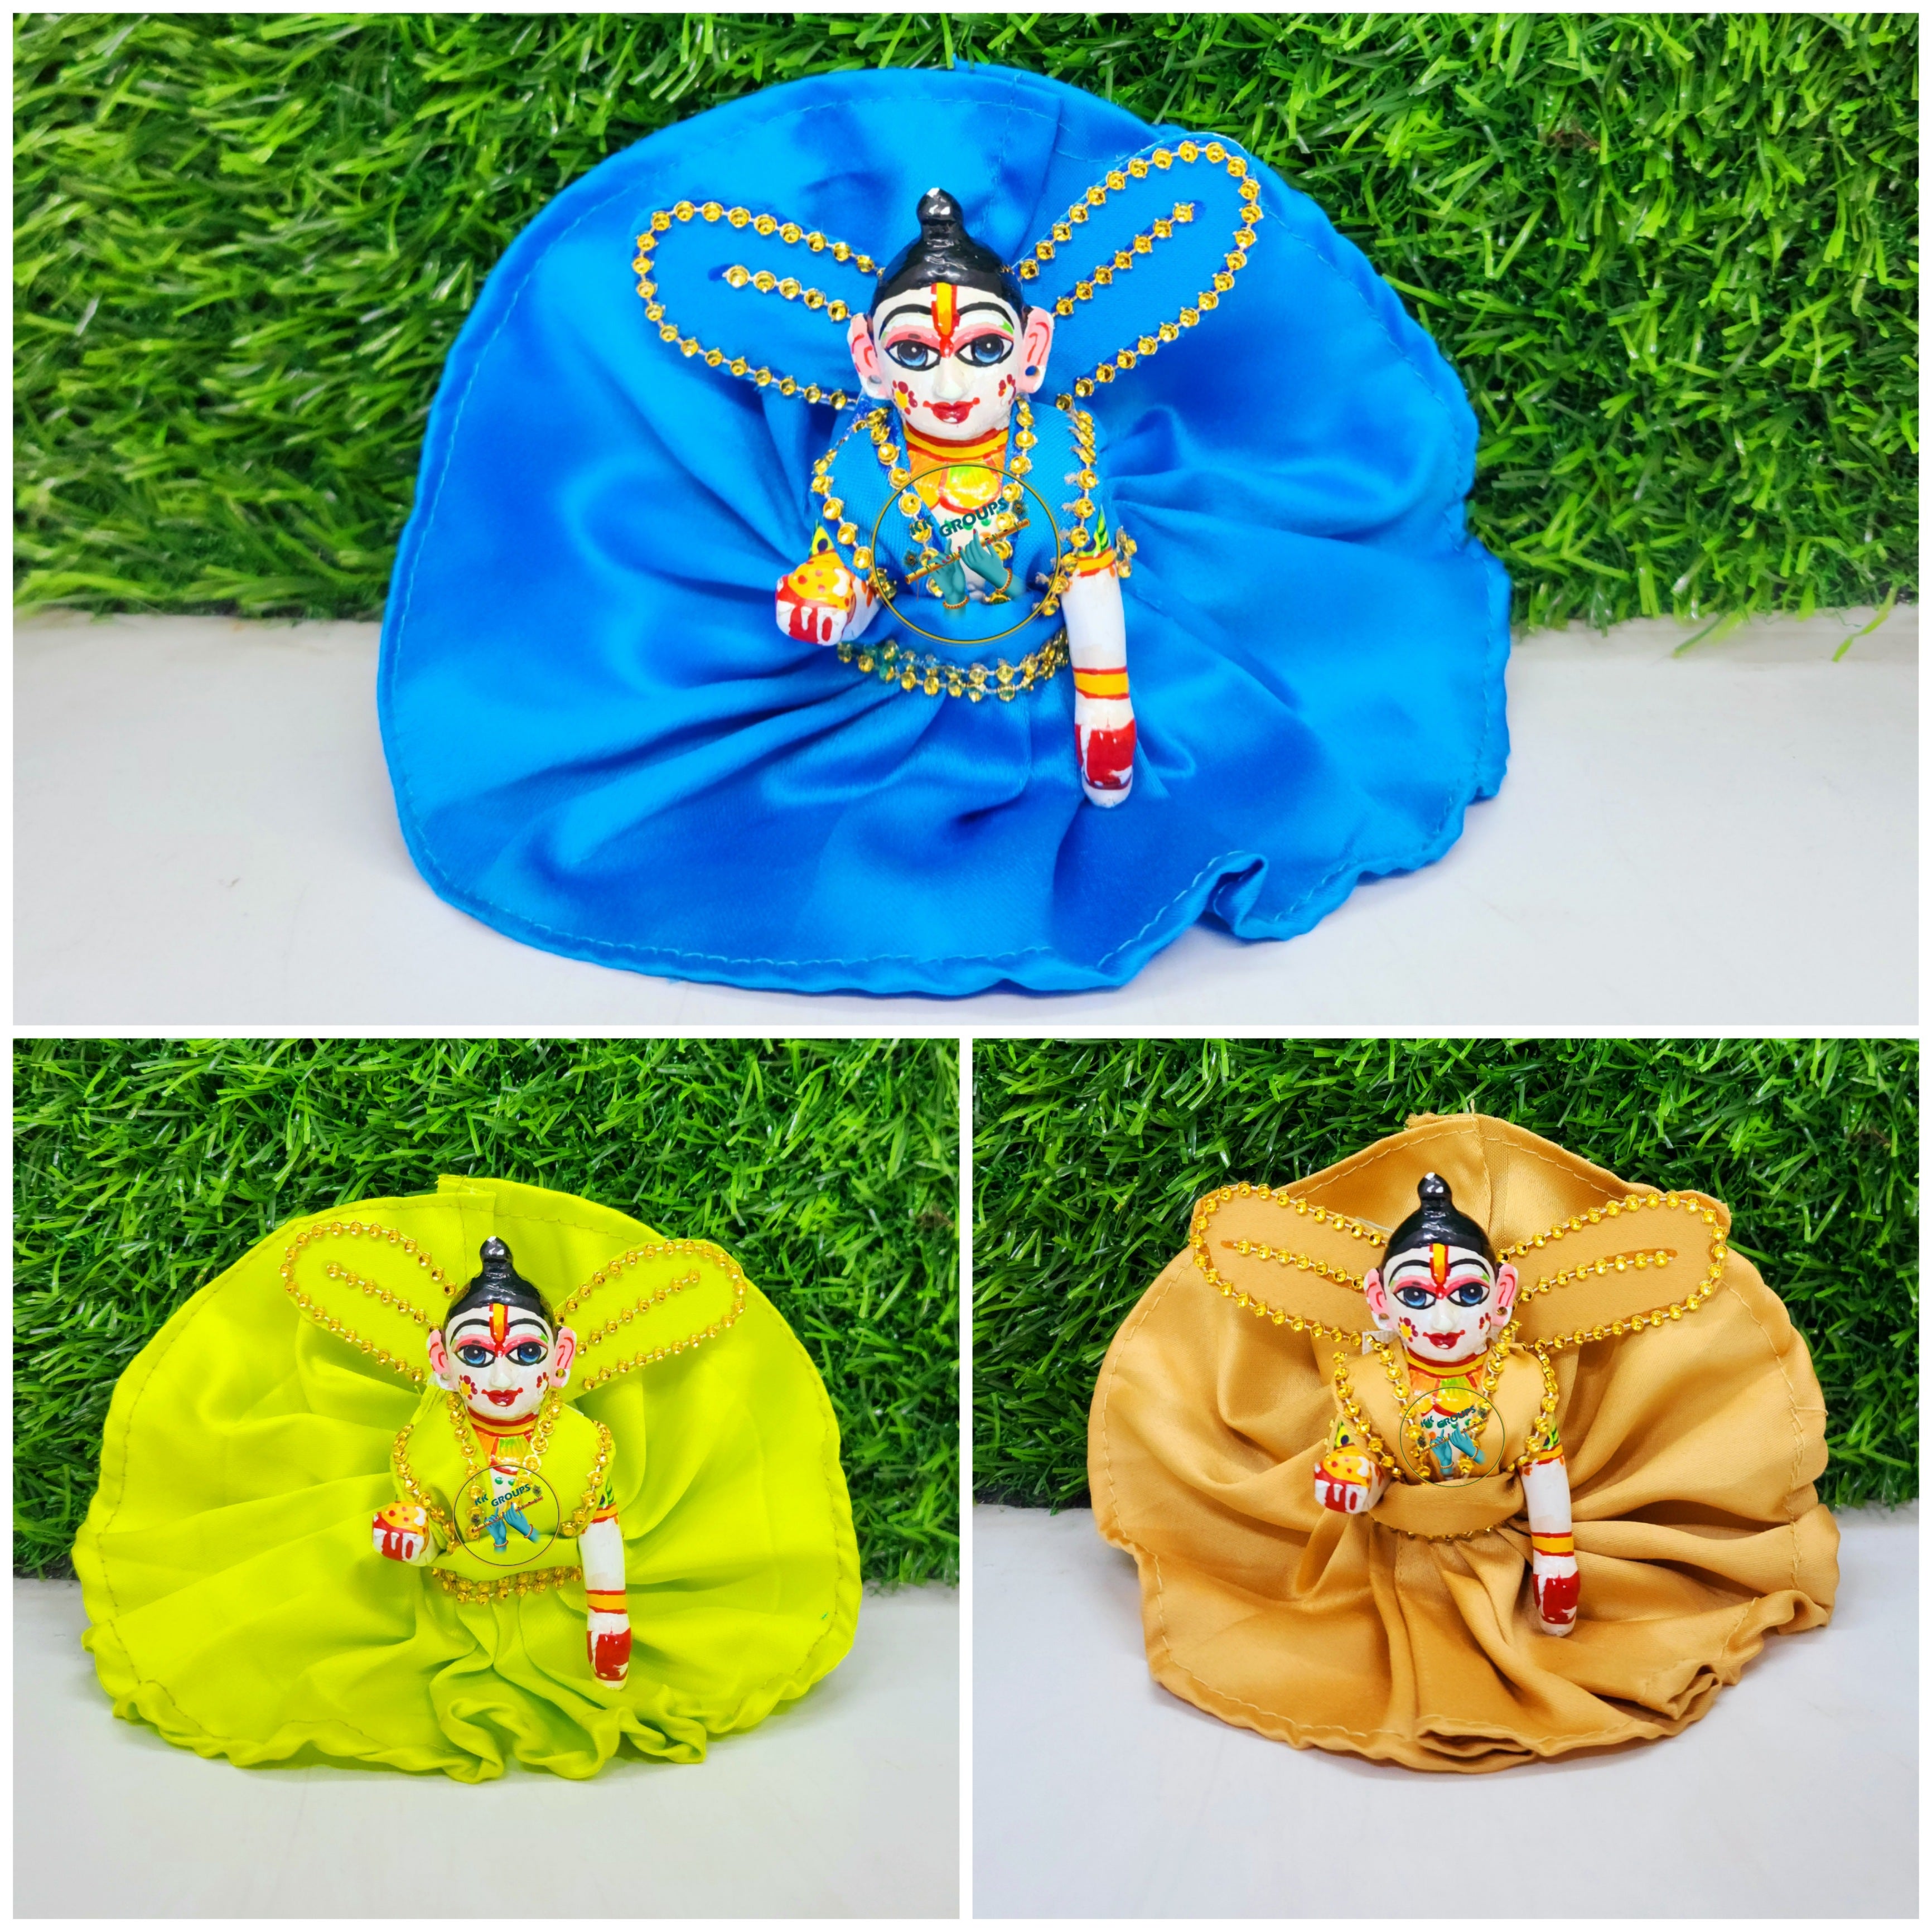 Buy Brij Sugandha Laddu Gopal Dress Set for Summer - Pure Cotton Soft Dress  for Ladoo Gopal Summer Dress (3) Online at Low Prices in India - Amazon.in